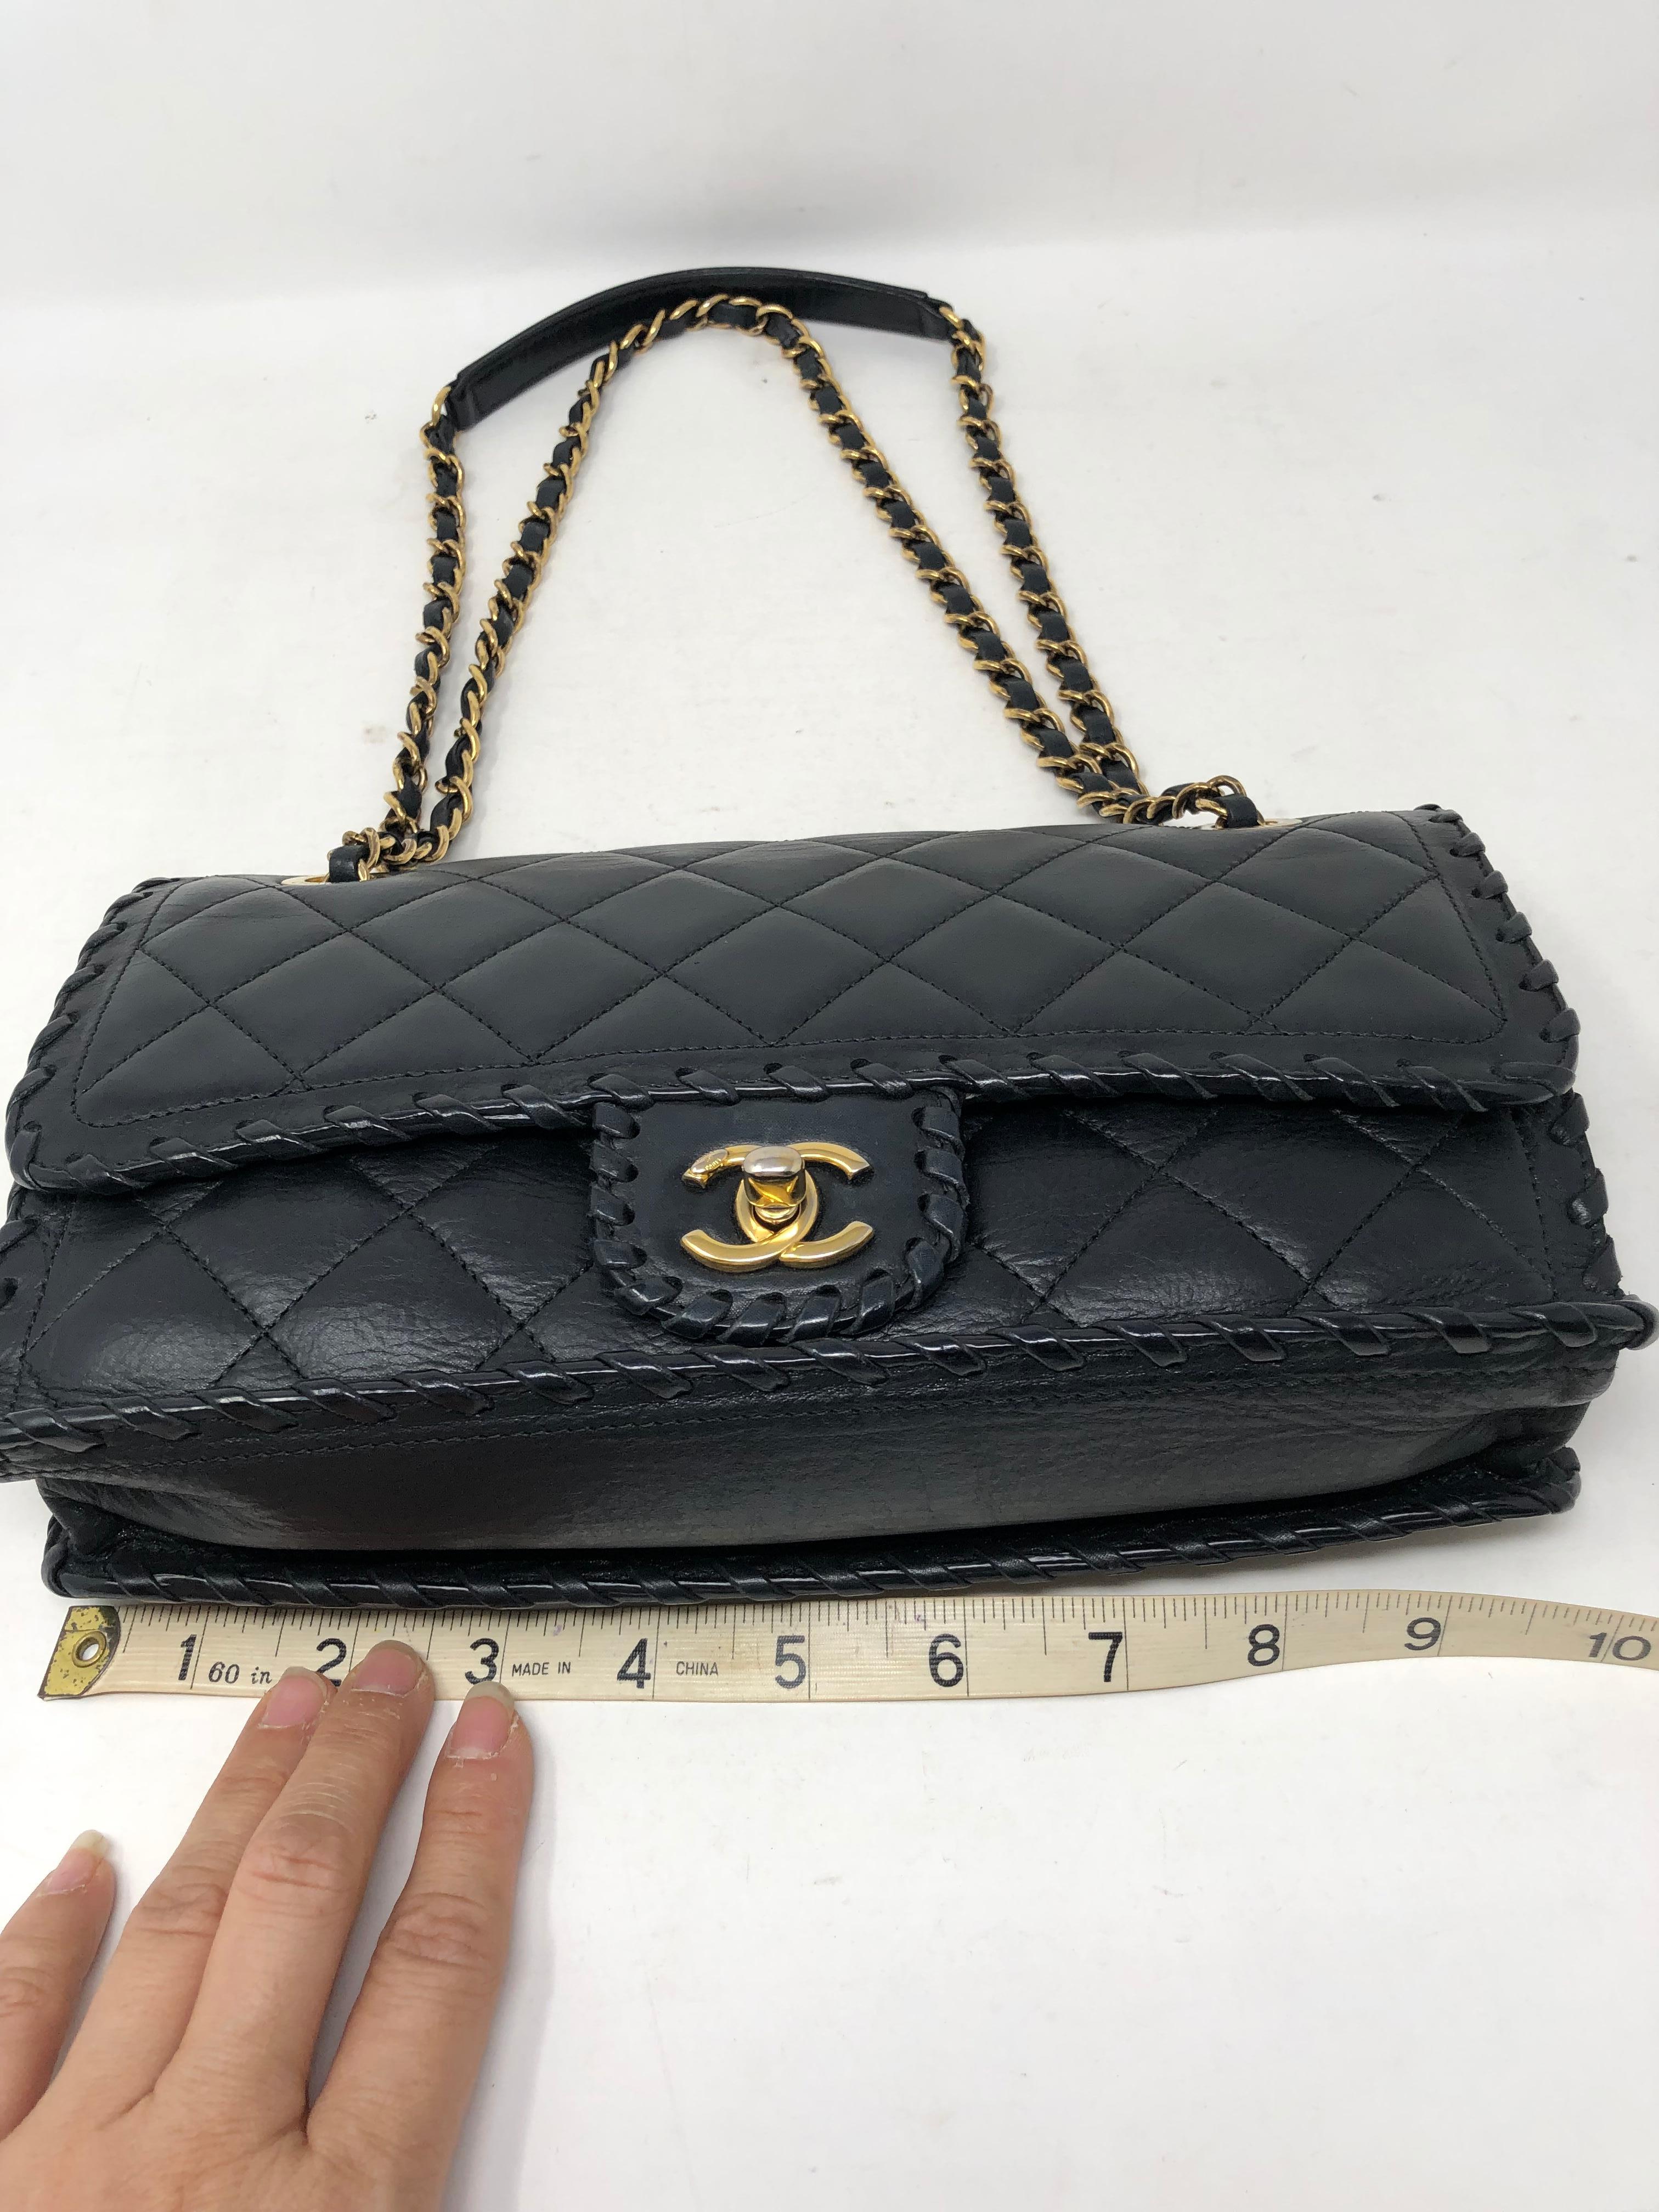 Chanel Whipstitch Classic Flap Bag 2